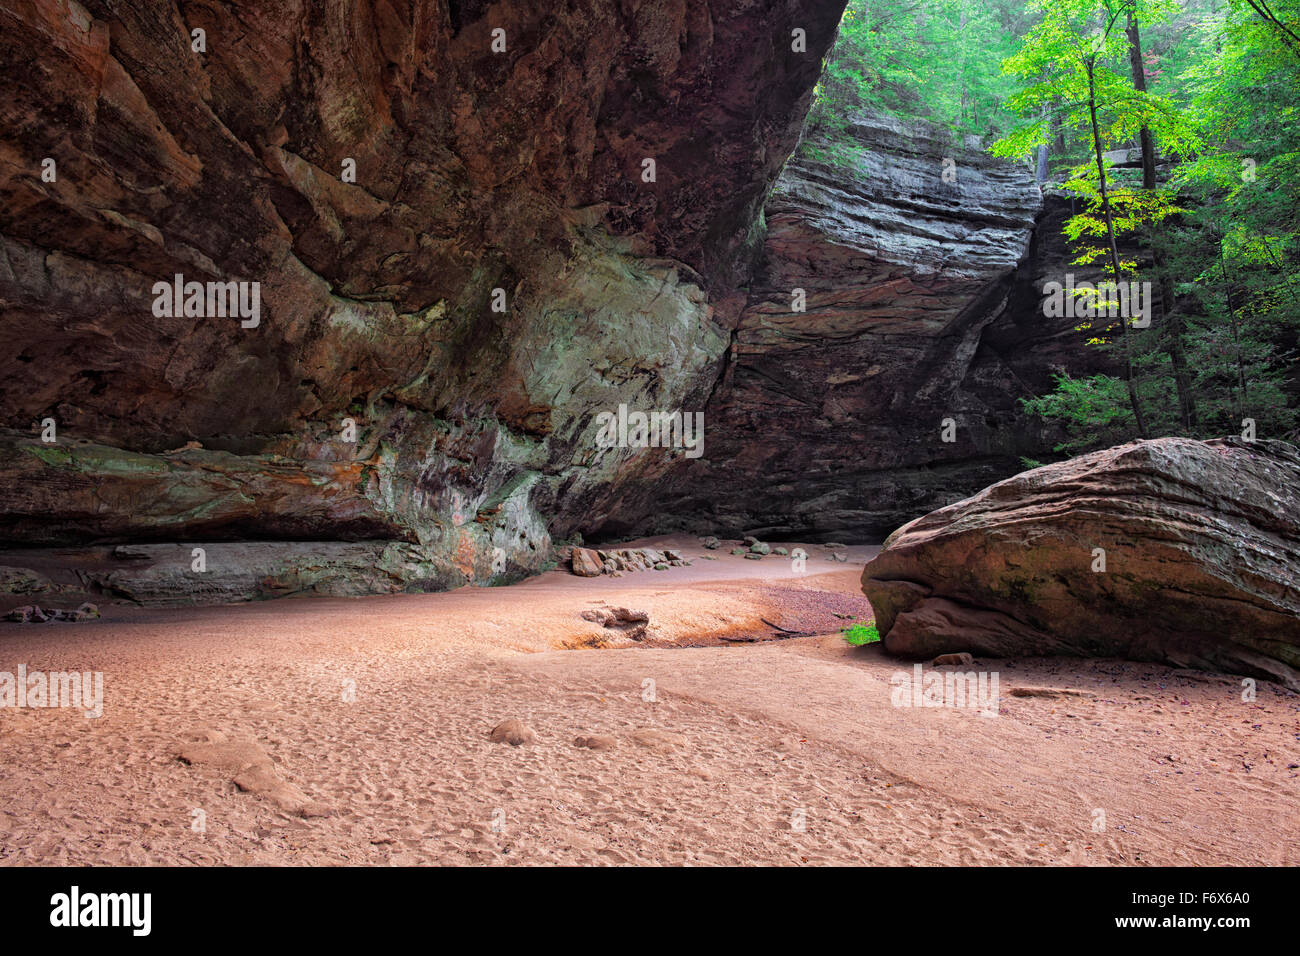 The largest cave in Ohio is Ash Cave with its large overhanging ledge in Hocking Hills State Park. Stock Photo